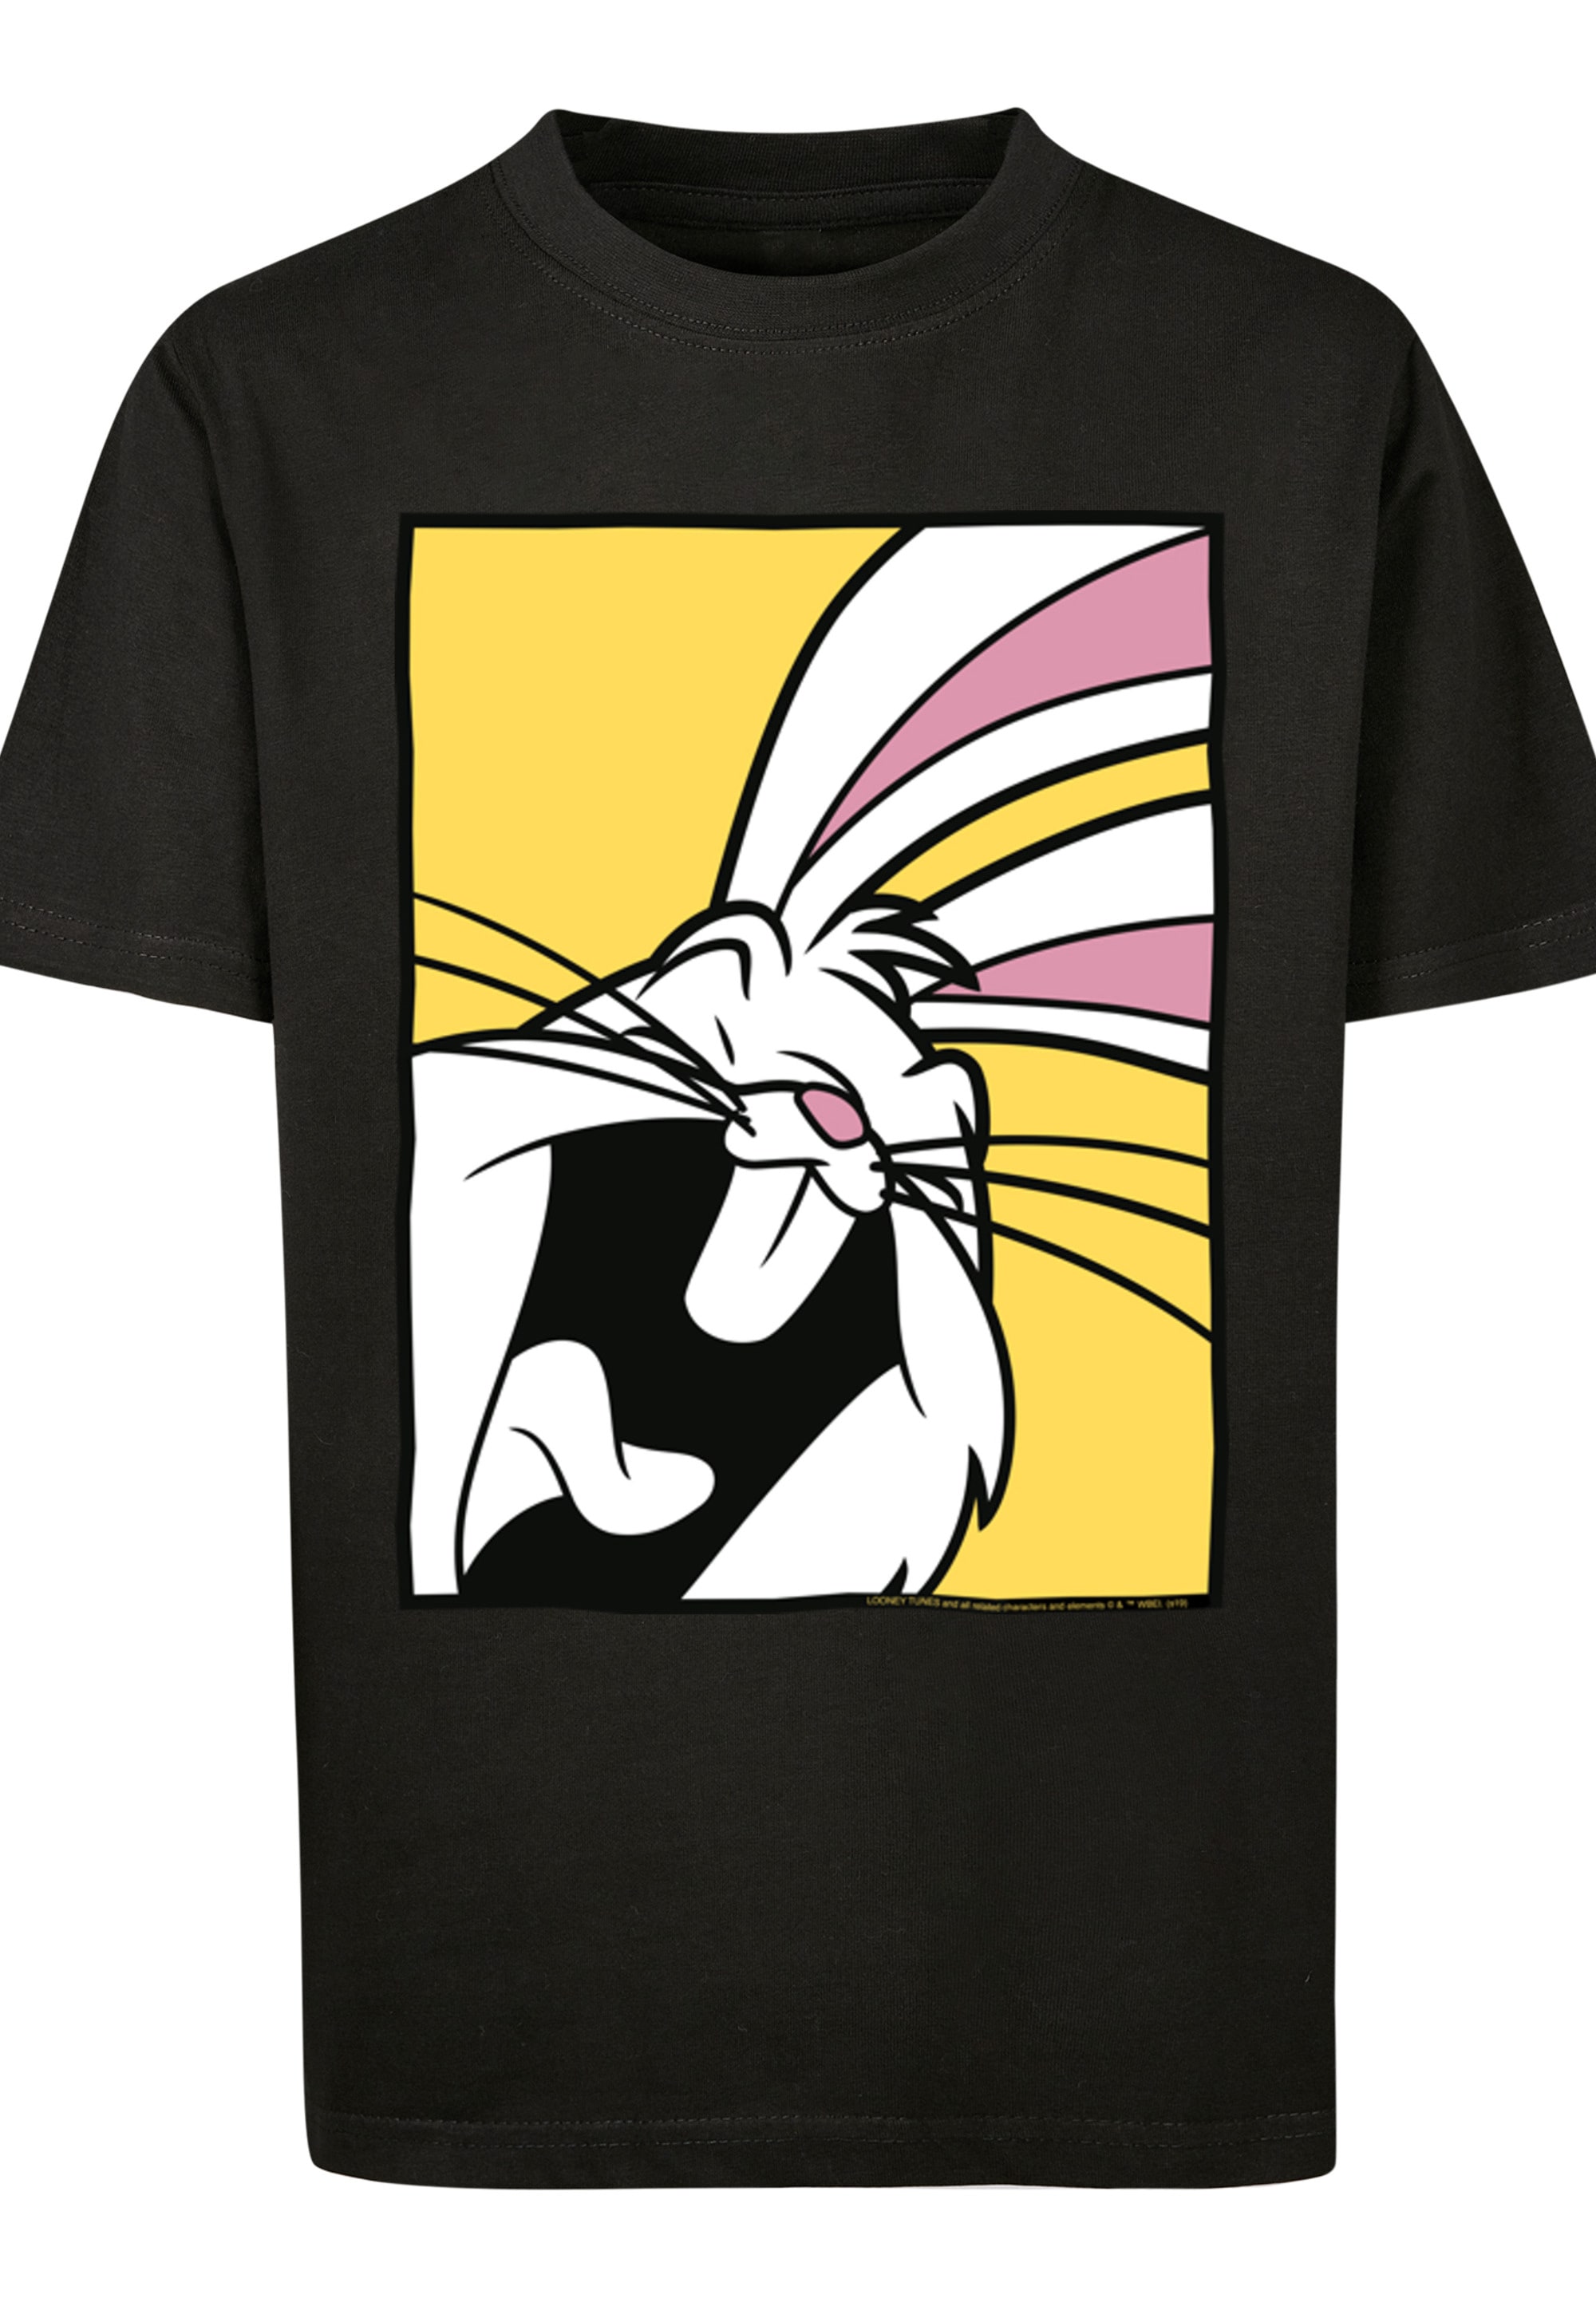 Bugs »Looney Tunes Bunny kaufen | Print T-Shirt BAUR F4NT4STIC Laughing«, online